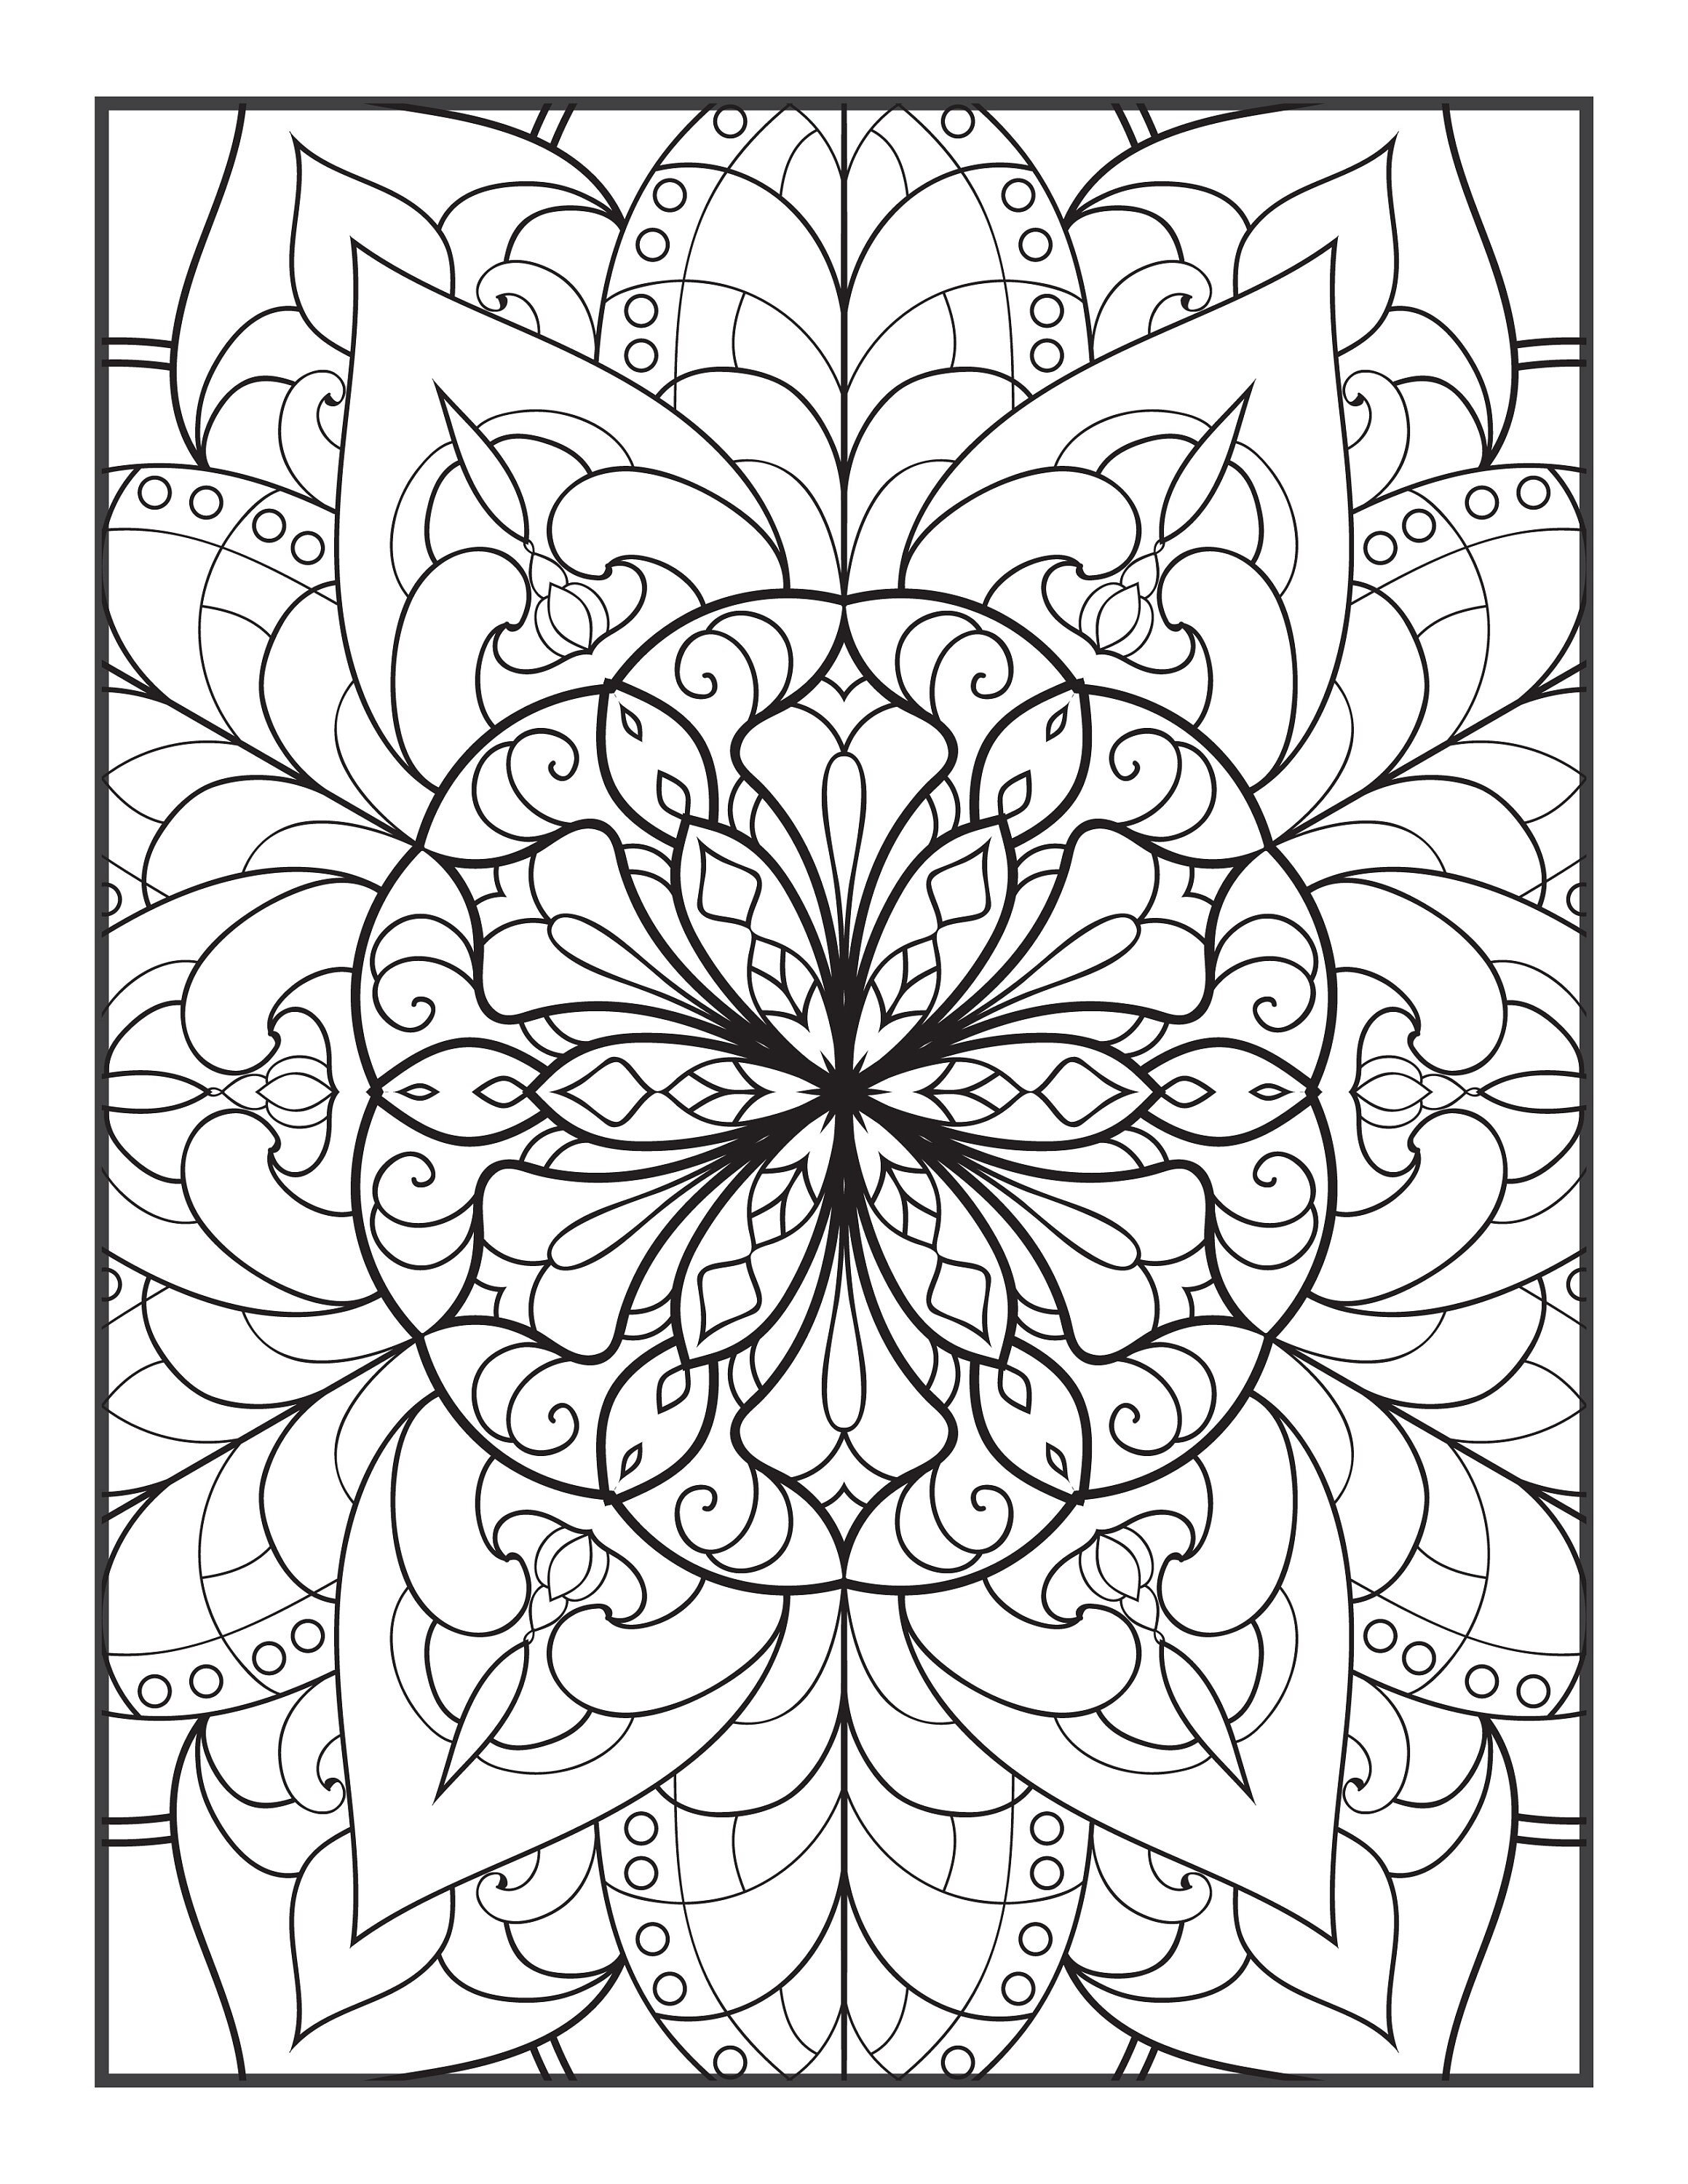 Printable coloring pages for teens and adults digital download